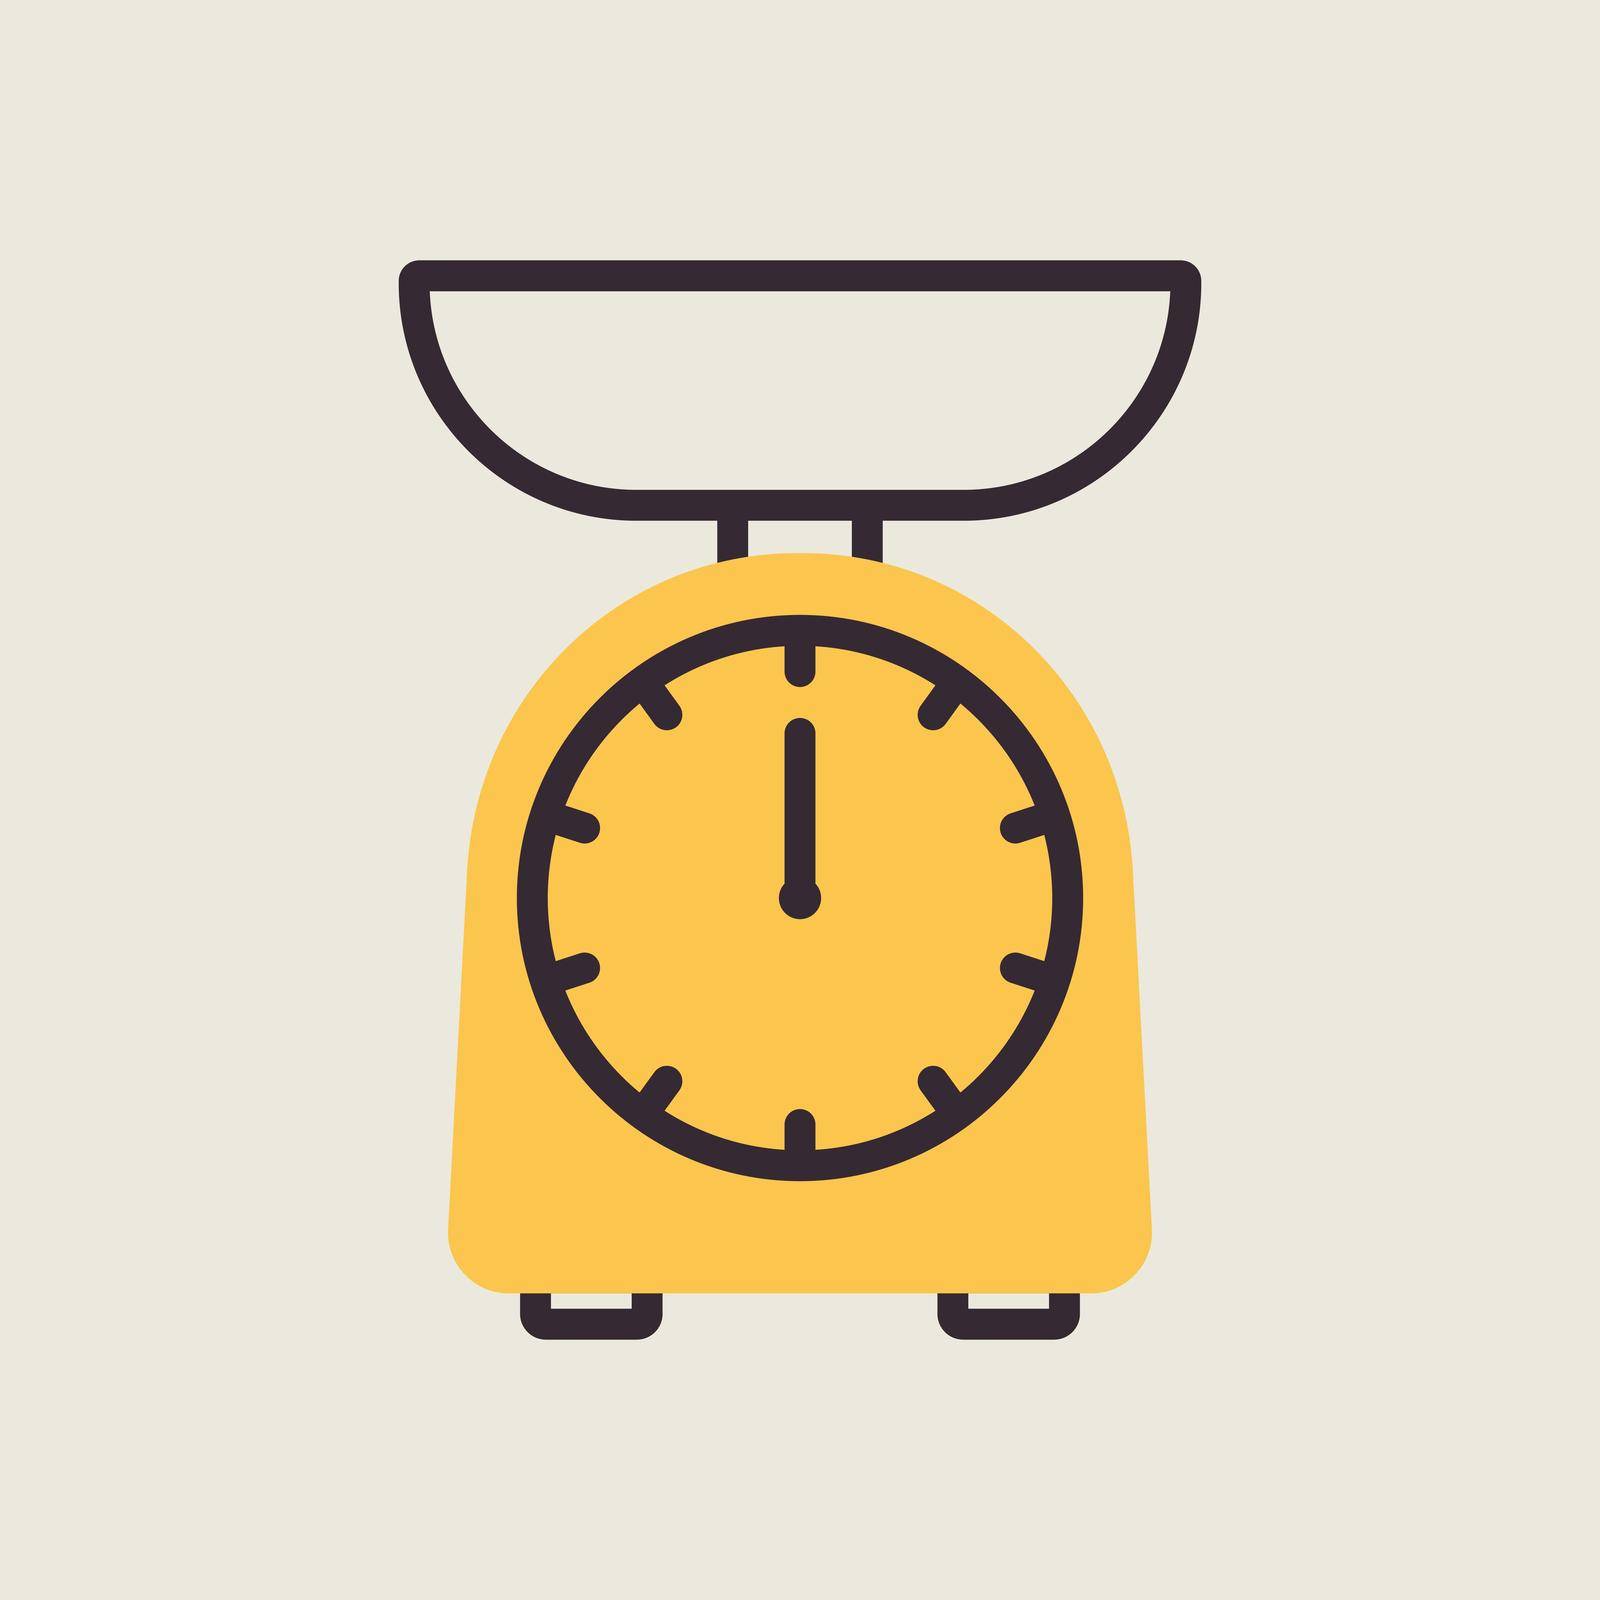 Scales vector icon. Kitchen appliance by nosik